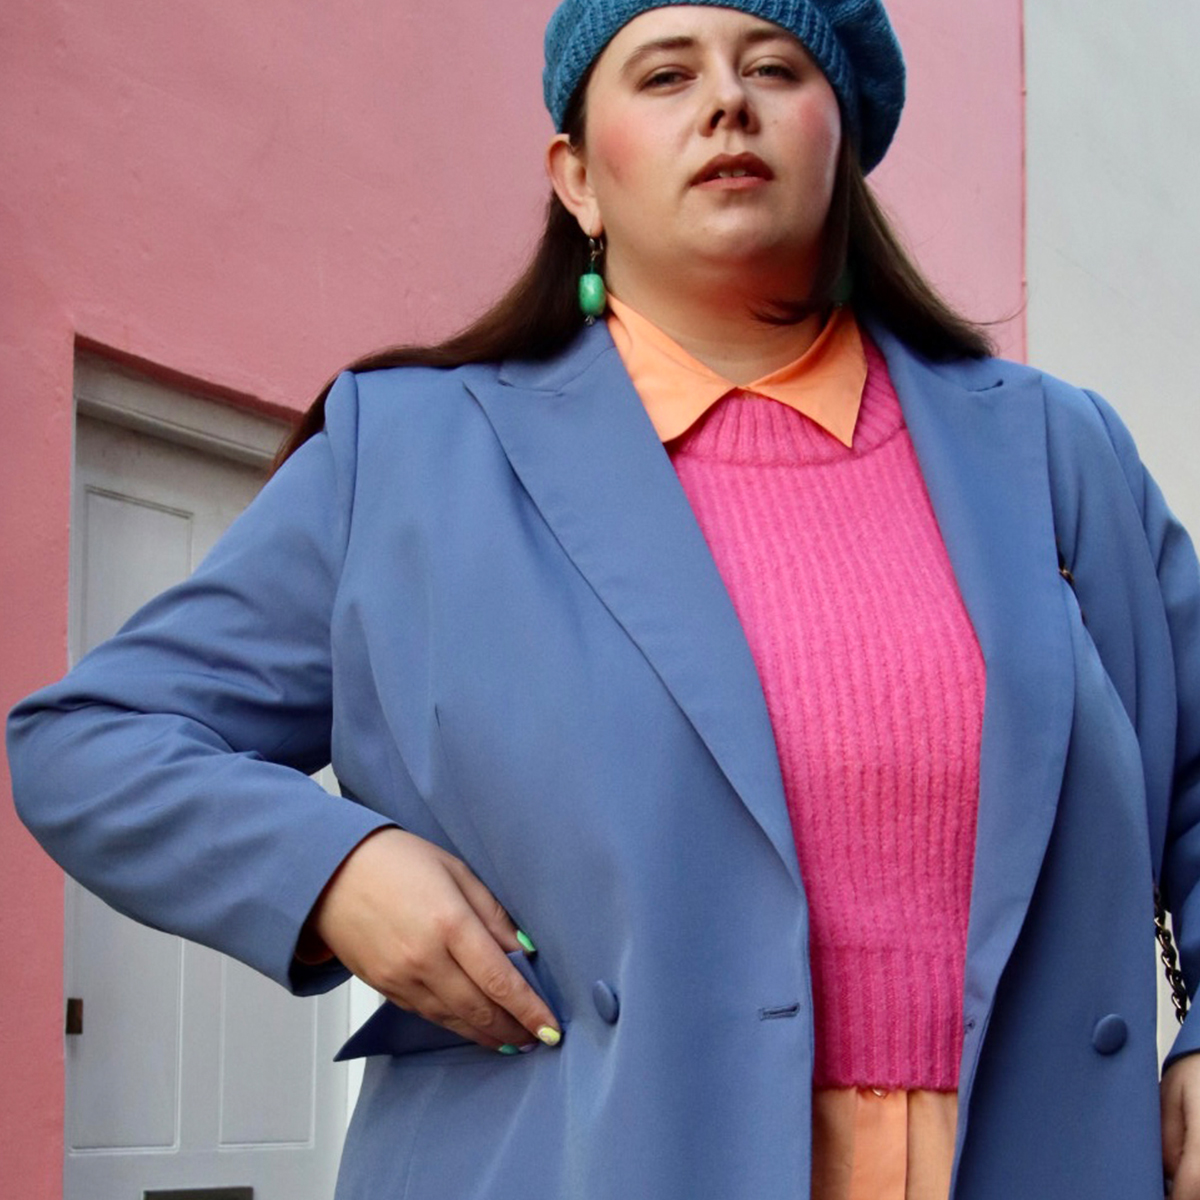 Where to Buy Amazing Plus-Size Tailoring